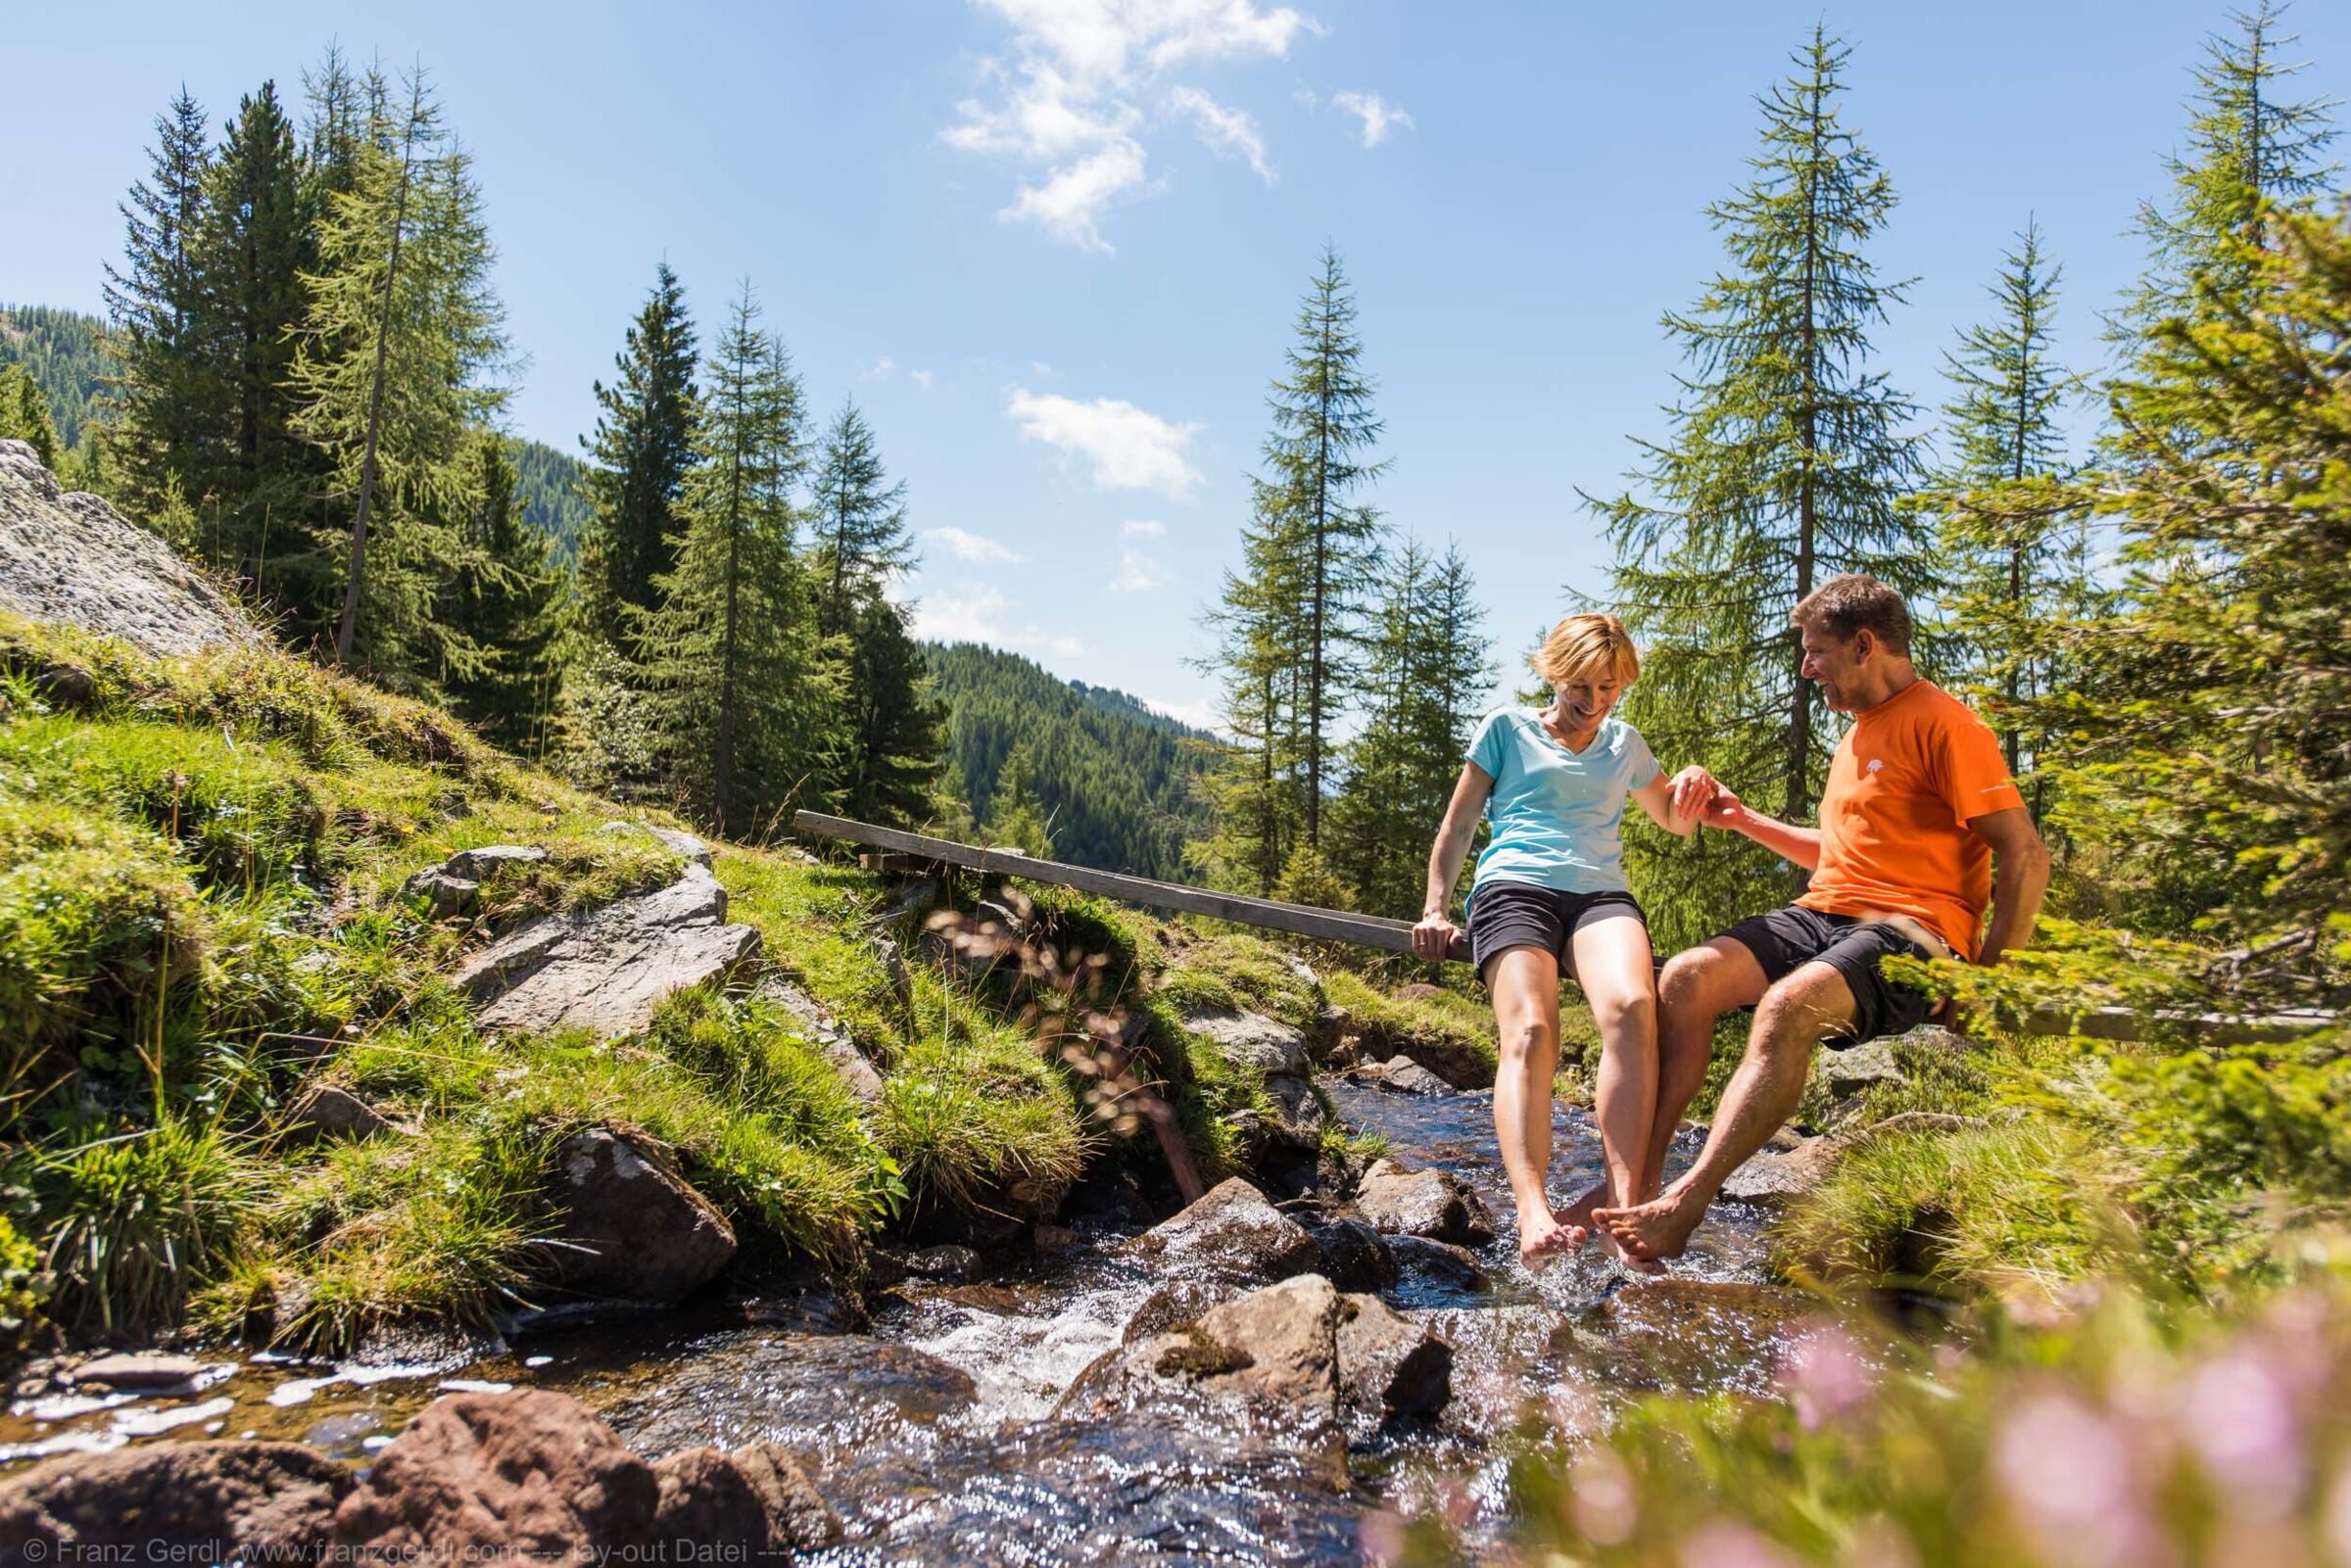 Two people standing in the stream in Carinthia